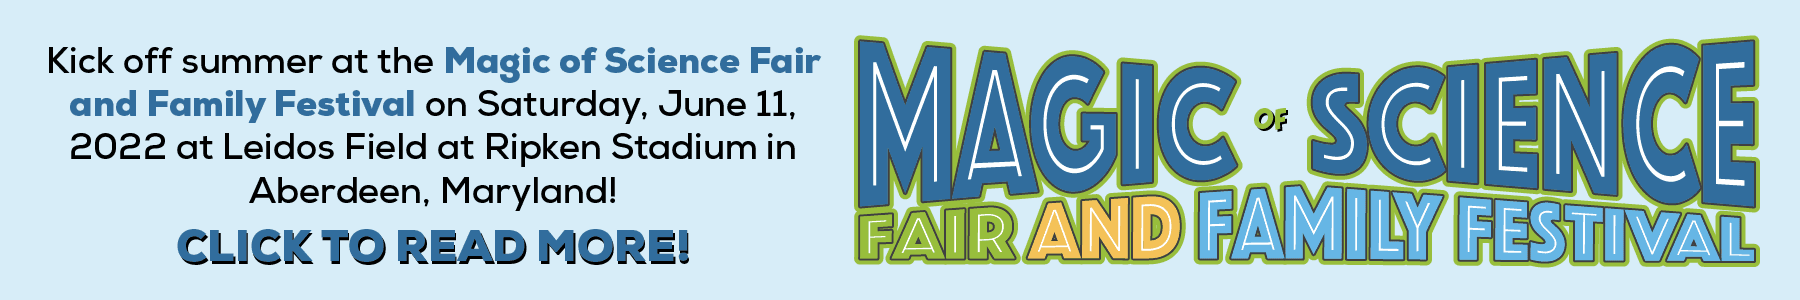 Join us at the Magic of Science Fair and Family Festival on June 11, 2022!